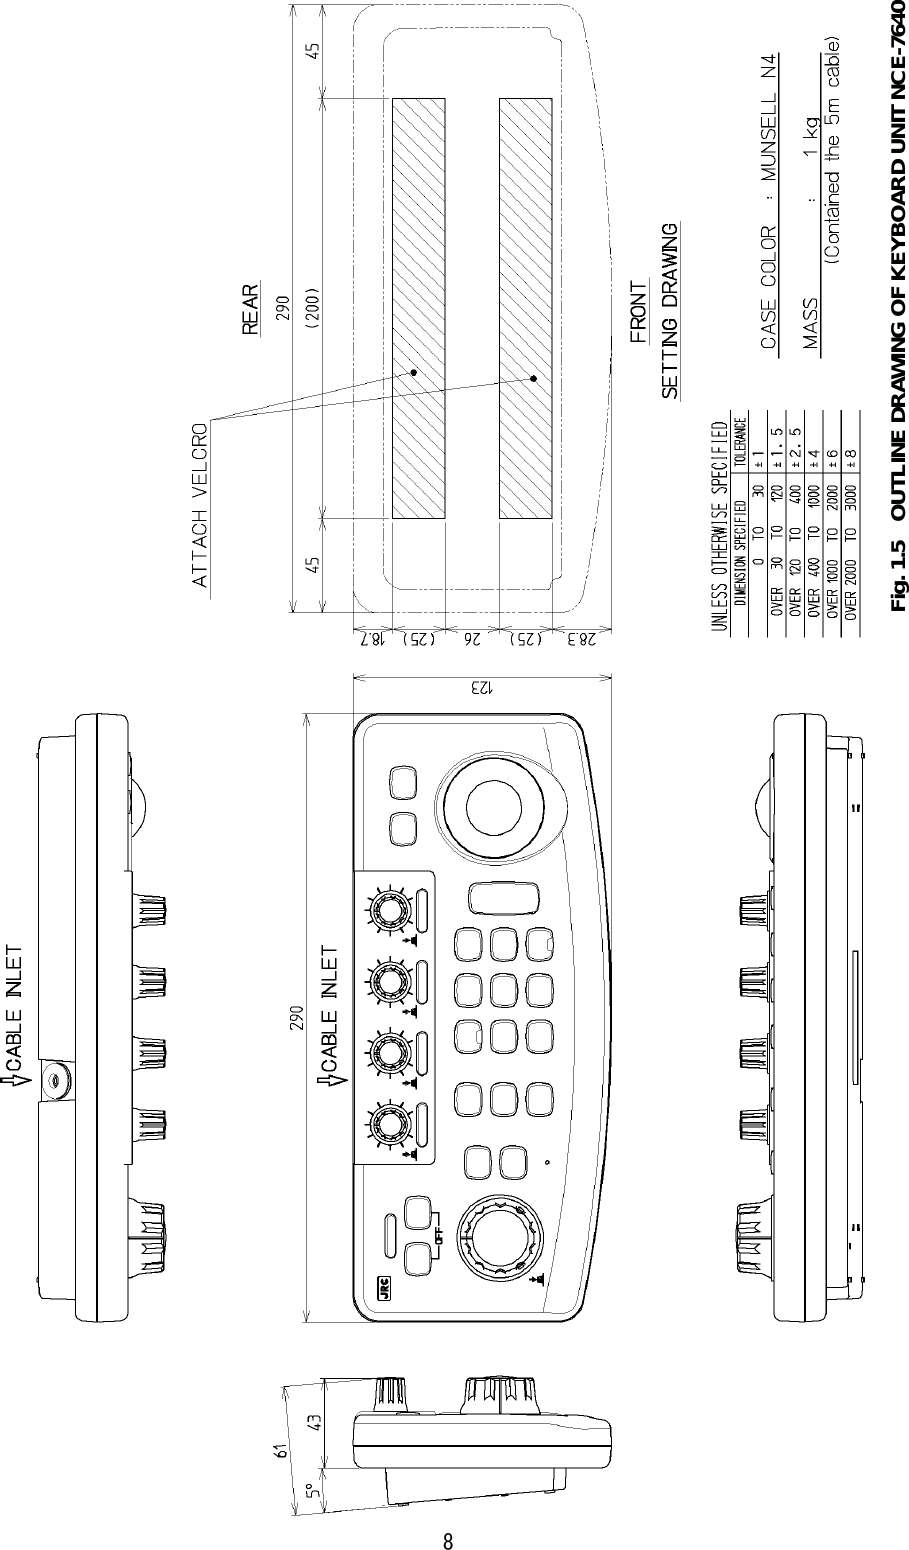   8  Fig. 1.5    OUTLINE DRAWING OF KEYBOARD UNIT NCE-7640